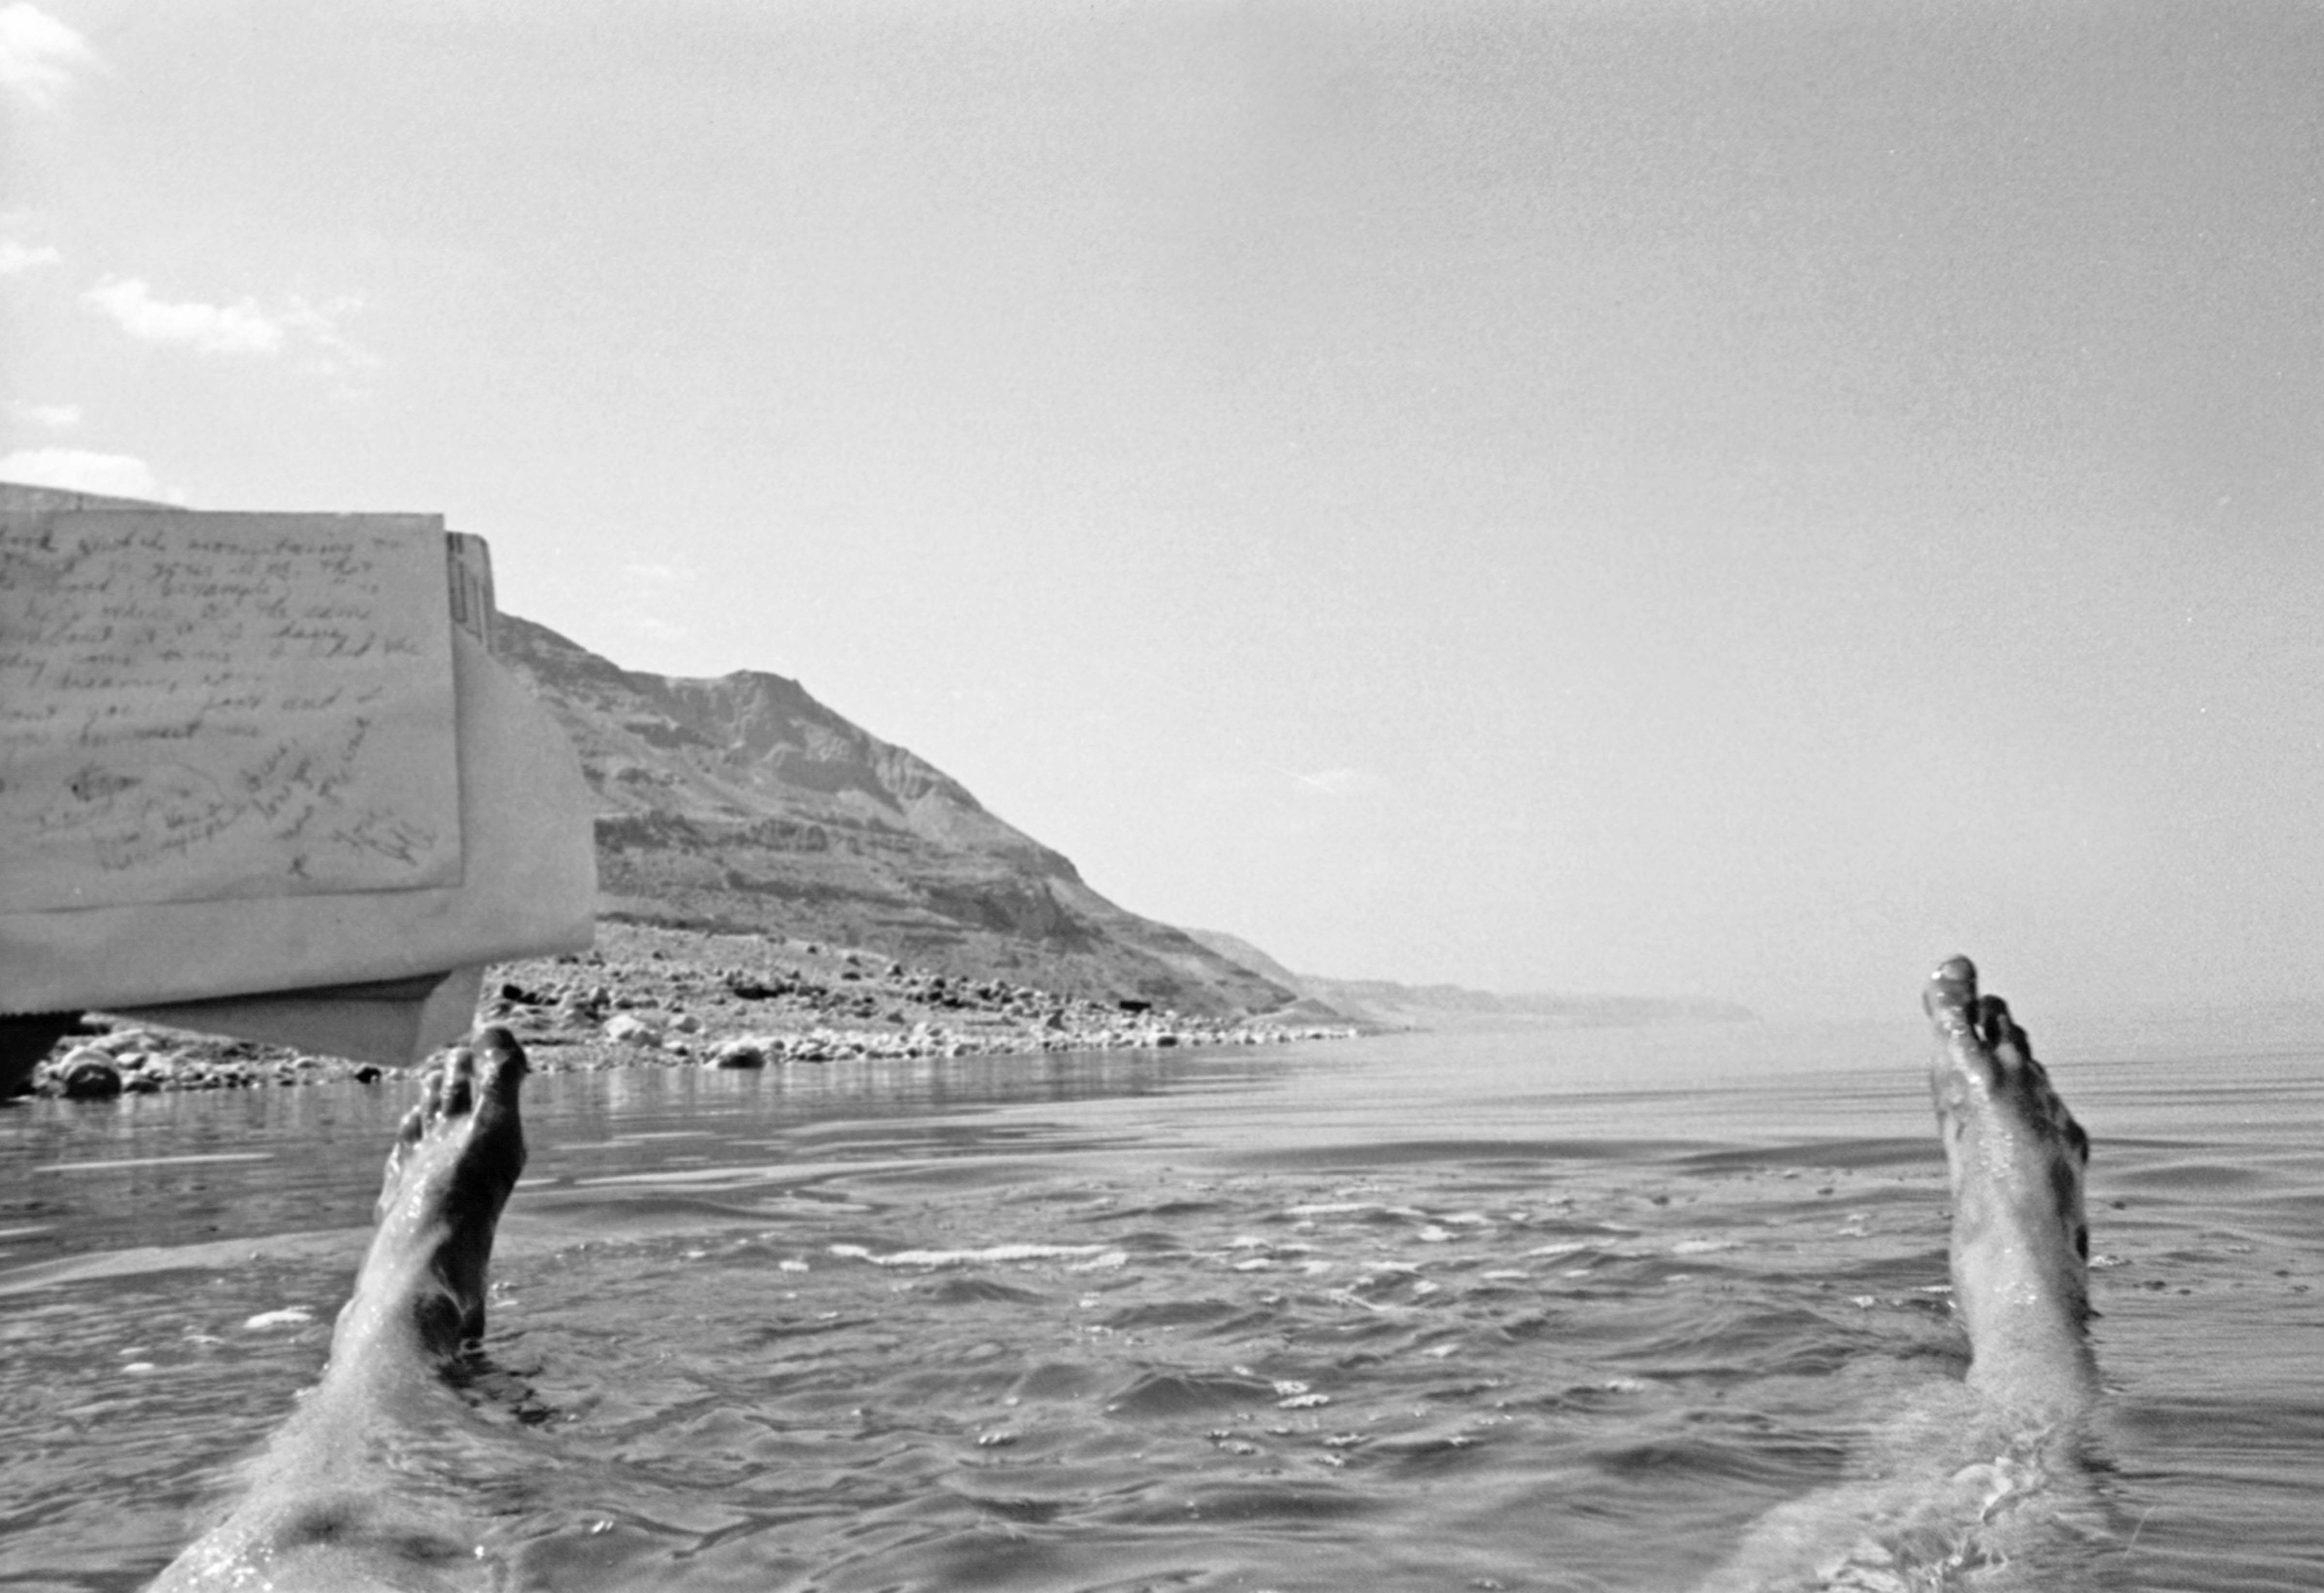 Palestine, Jeff Shea Writing Love Letter While Floating In Dead Sea, 1984